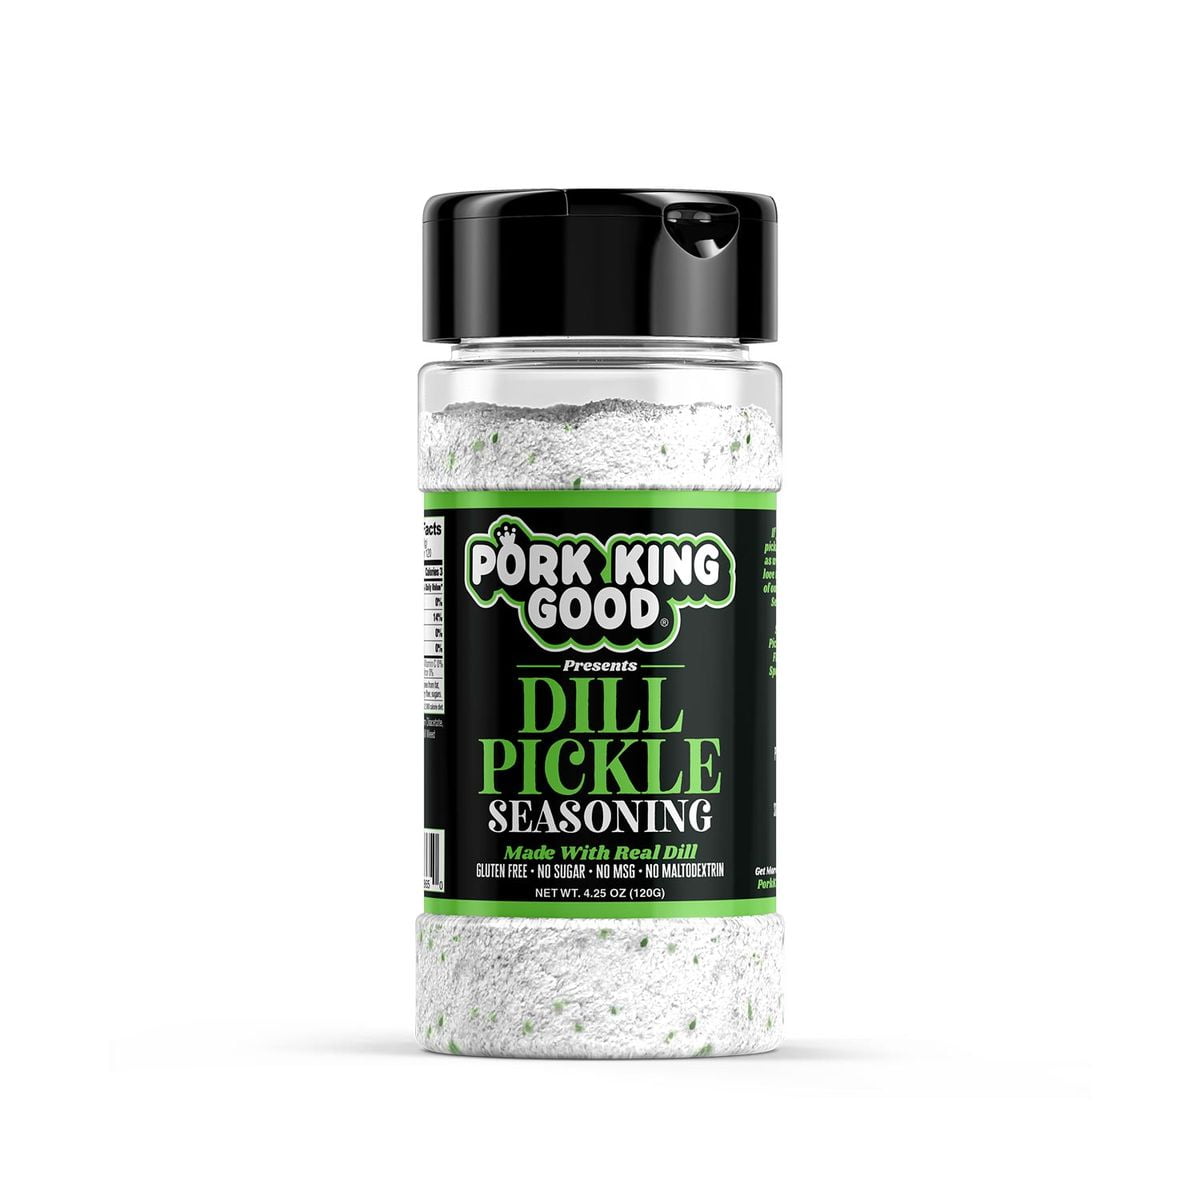 What to make with TJs pickle seasoning? : r/Noom